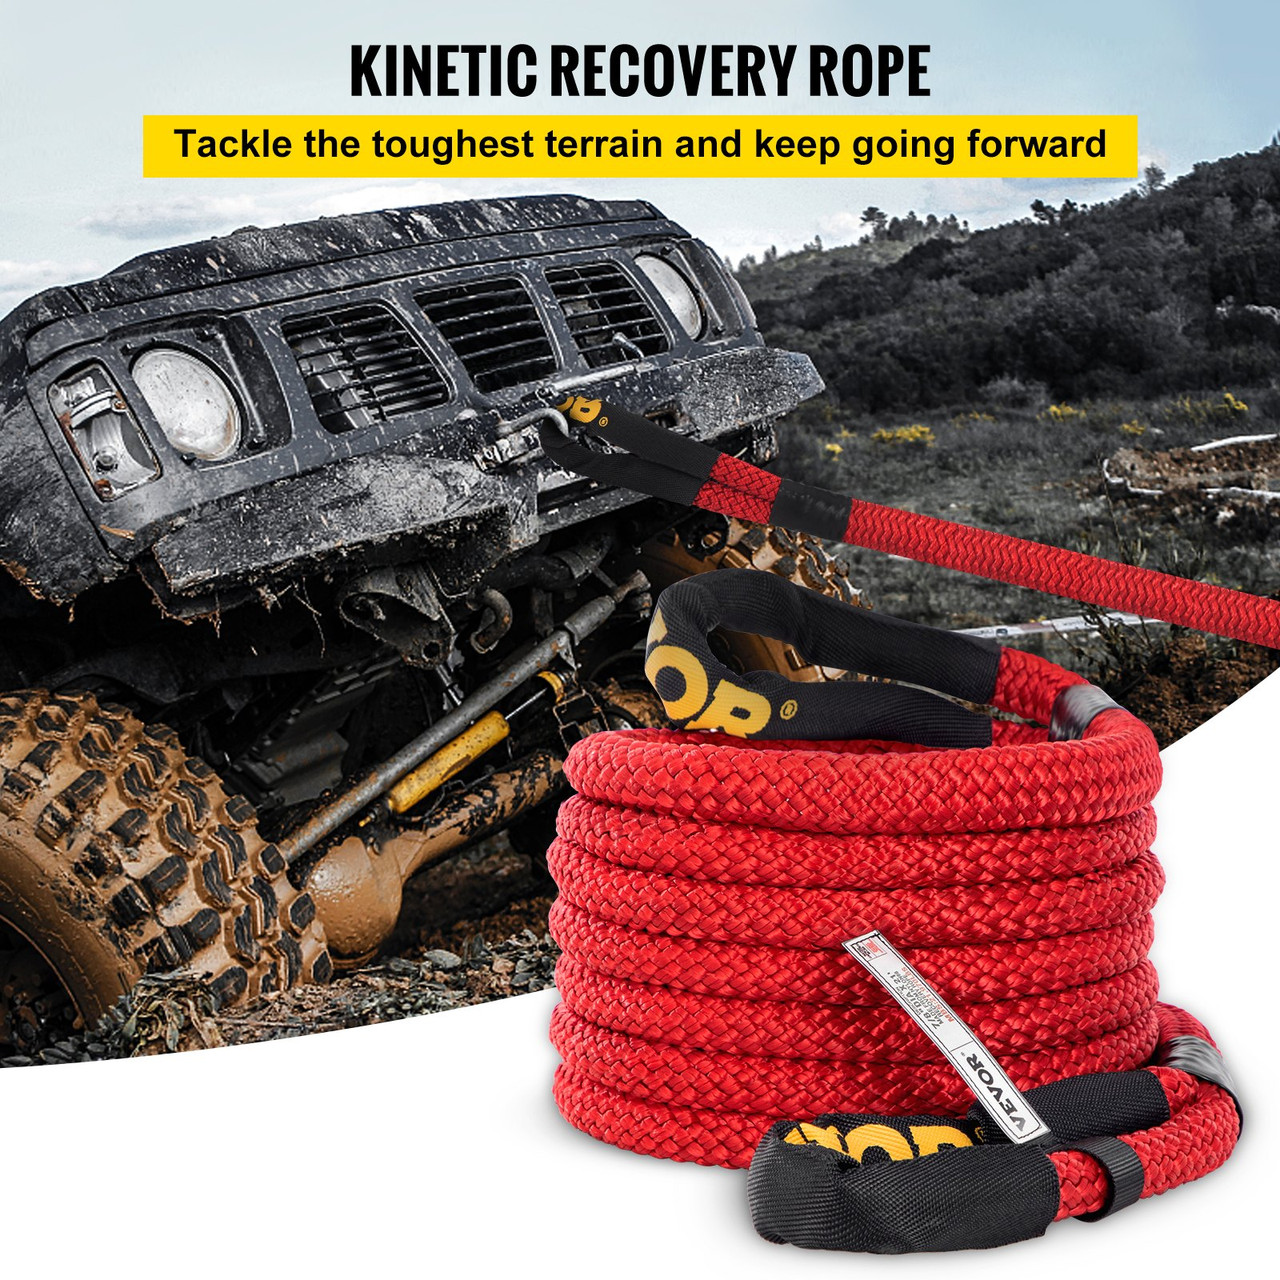 7/8" x 21' Kinetic Recovery Rope, 21,970 lbs, Heavy Duty Nylon Double Braided Kinetic Energy Rope w/ Loops and Protective Sleeves, for Truck Off-Road Vehicle ATV UTV, Carry Bag Included, Red